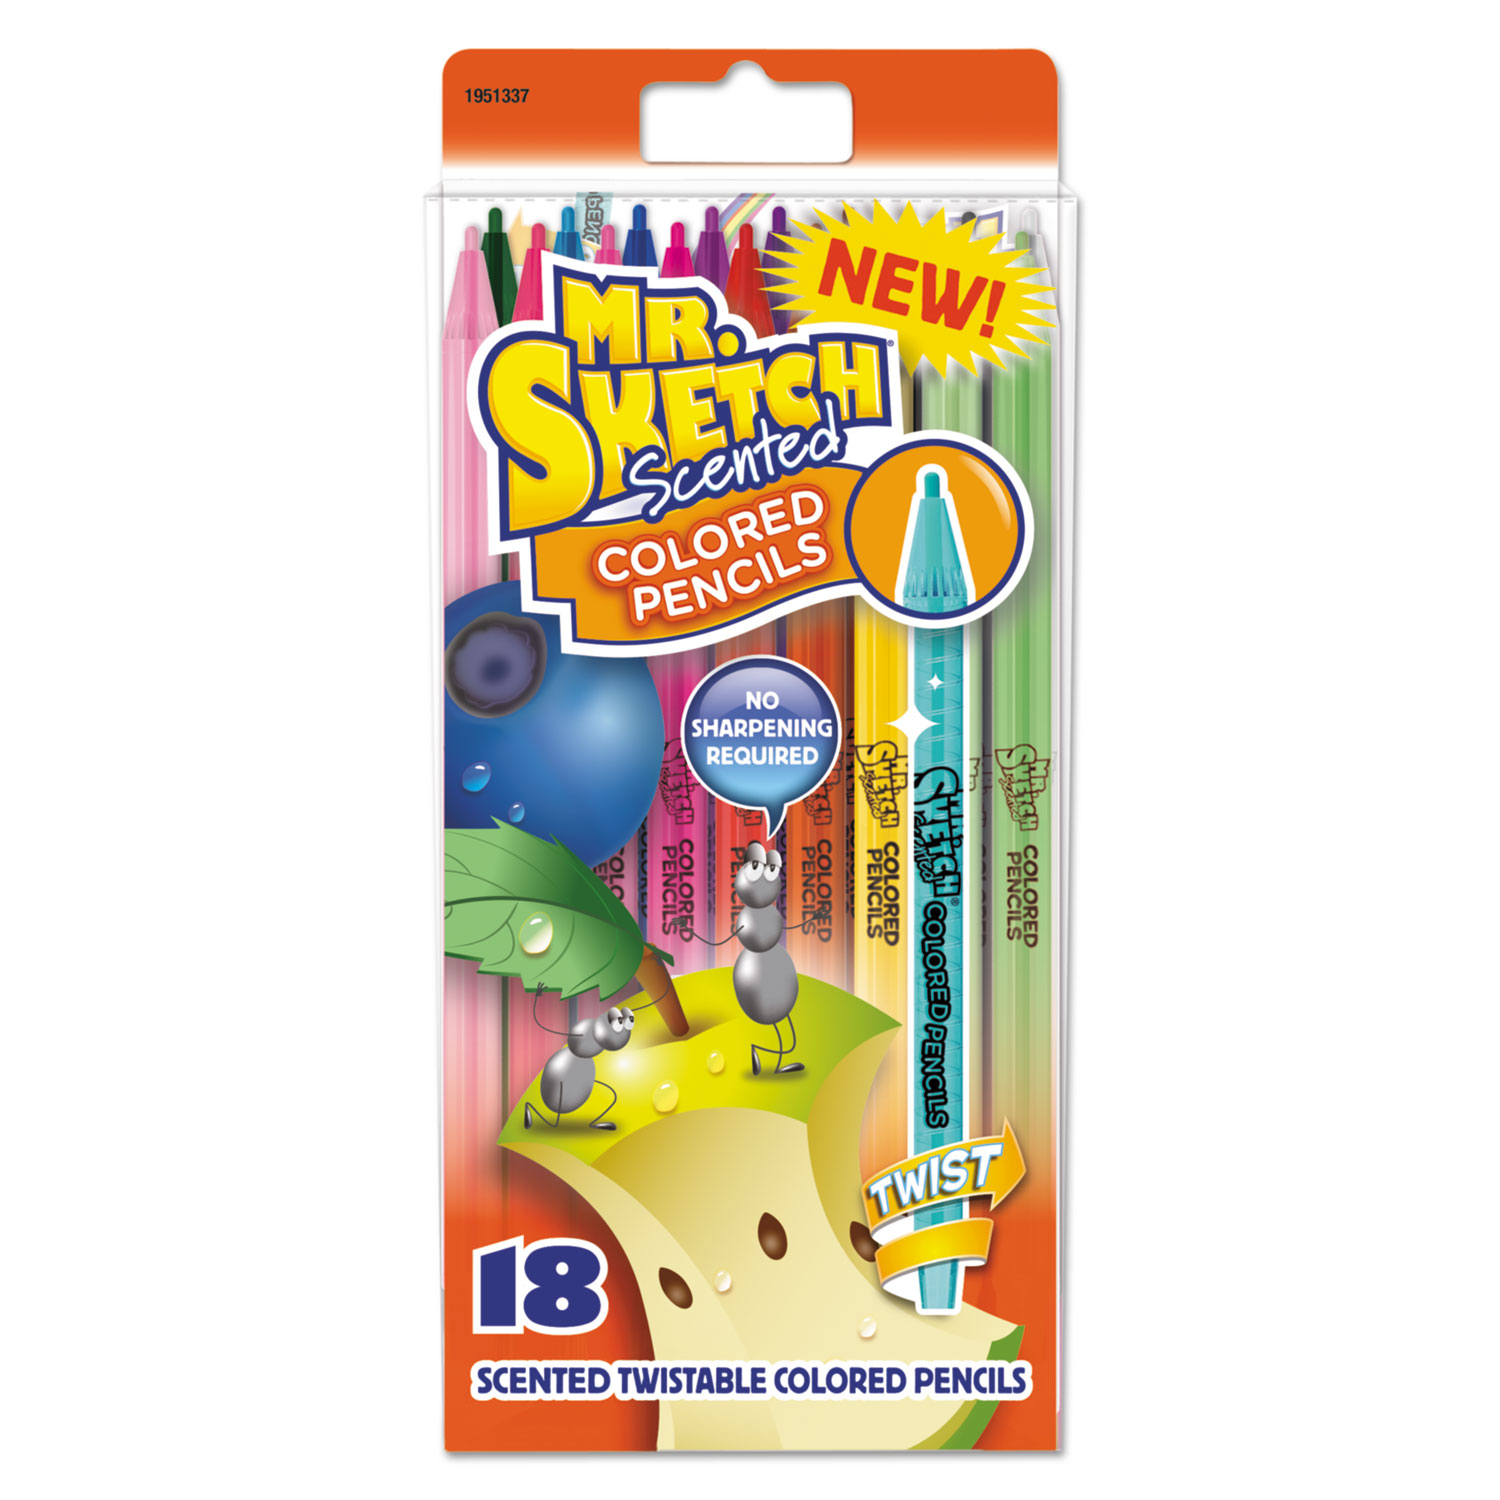  Mr. Sketch 1951337 Scented Twistable Colored Pencils, Assorted Lead/Barrel Colors, 18/Pack (SAN1951337) 